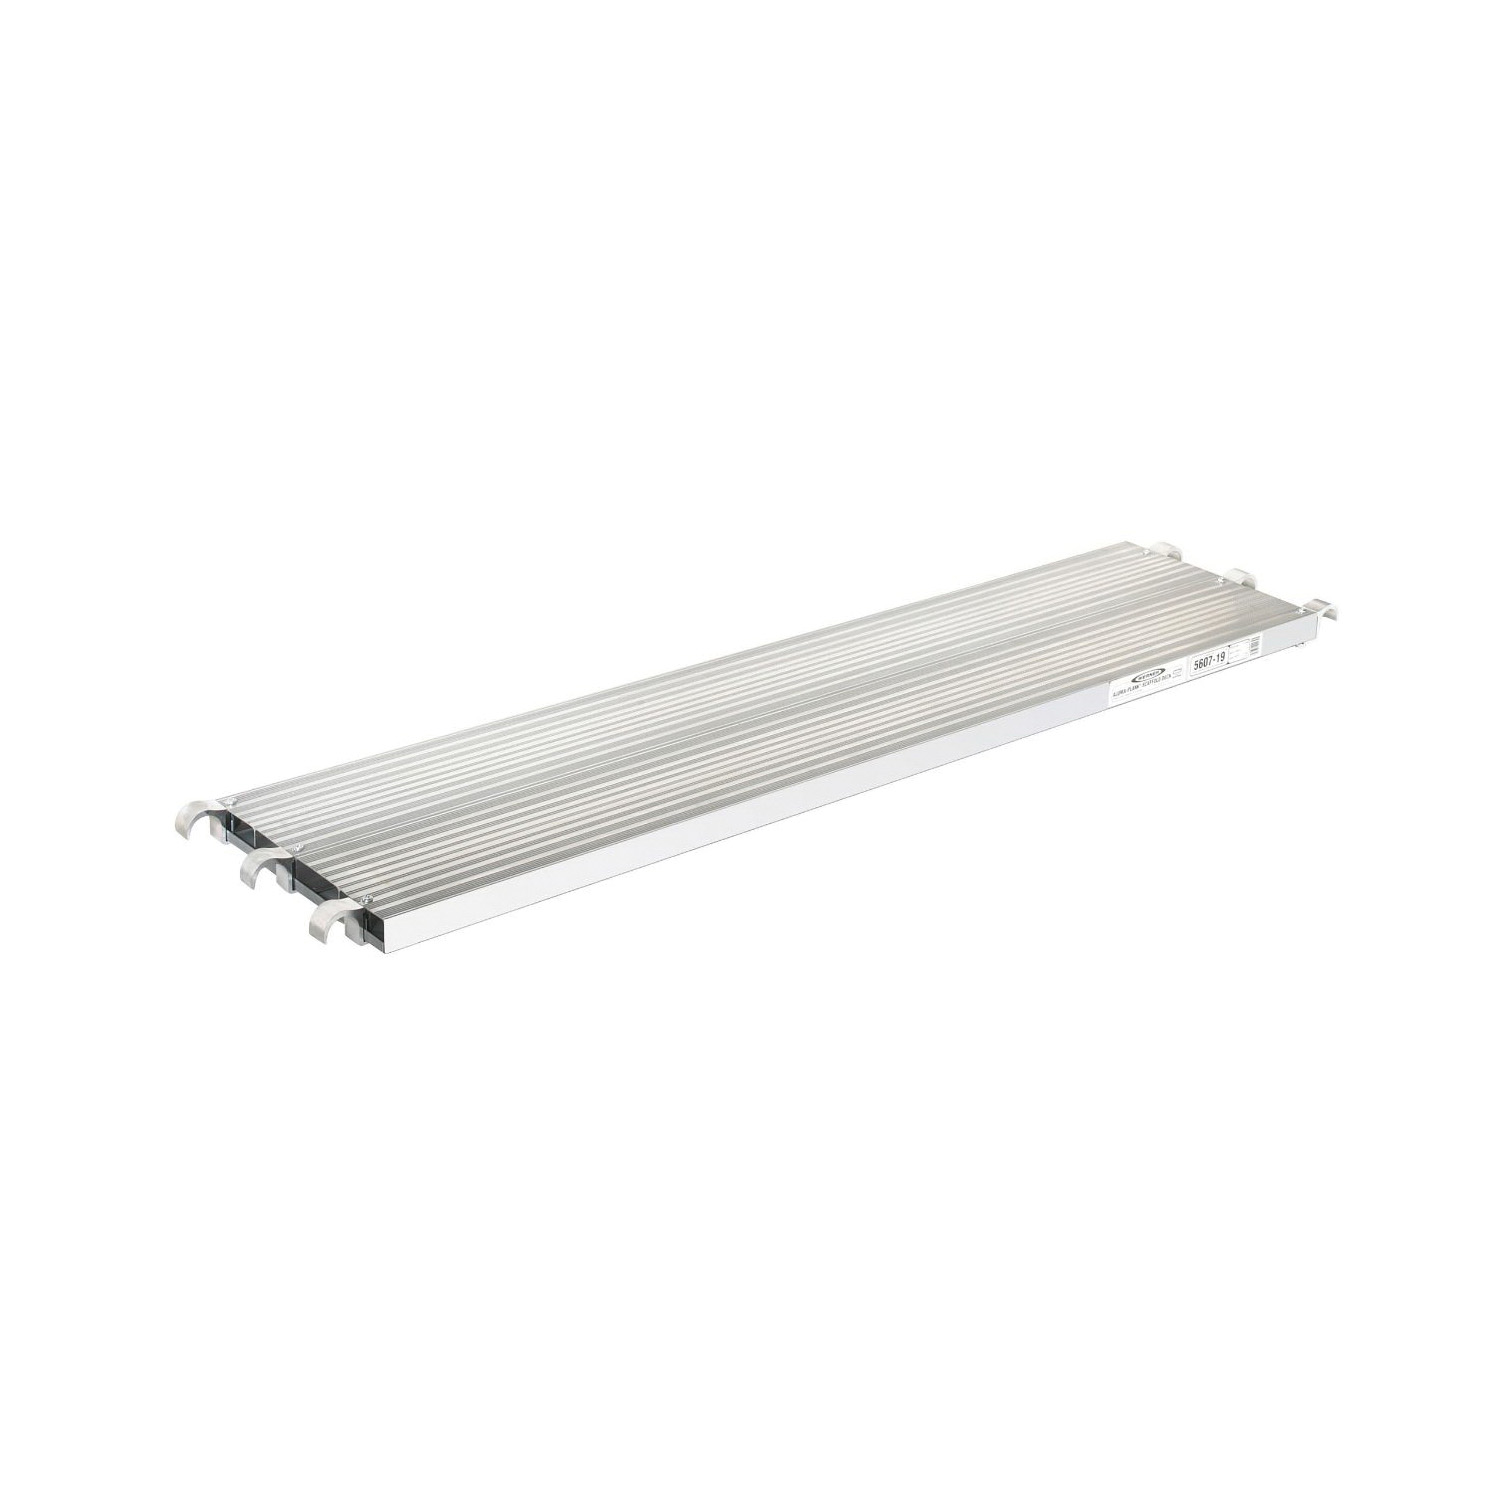 WERNER® 5607-19 5600 Extruded Aluma Board, 7 ft H, 250 lb Load, Aluminum redirect to product page